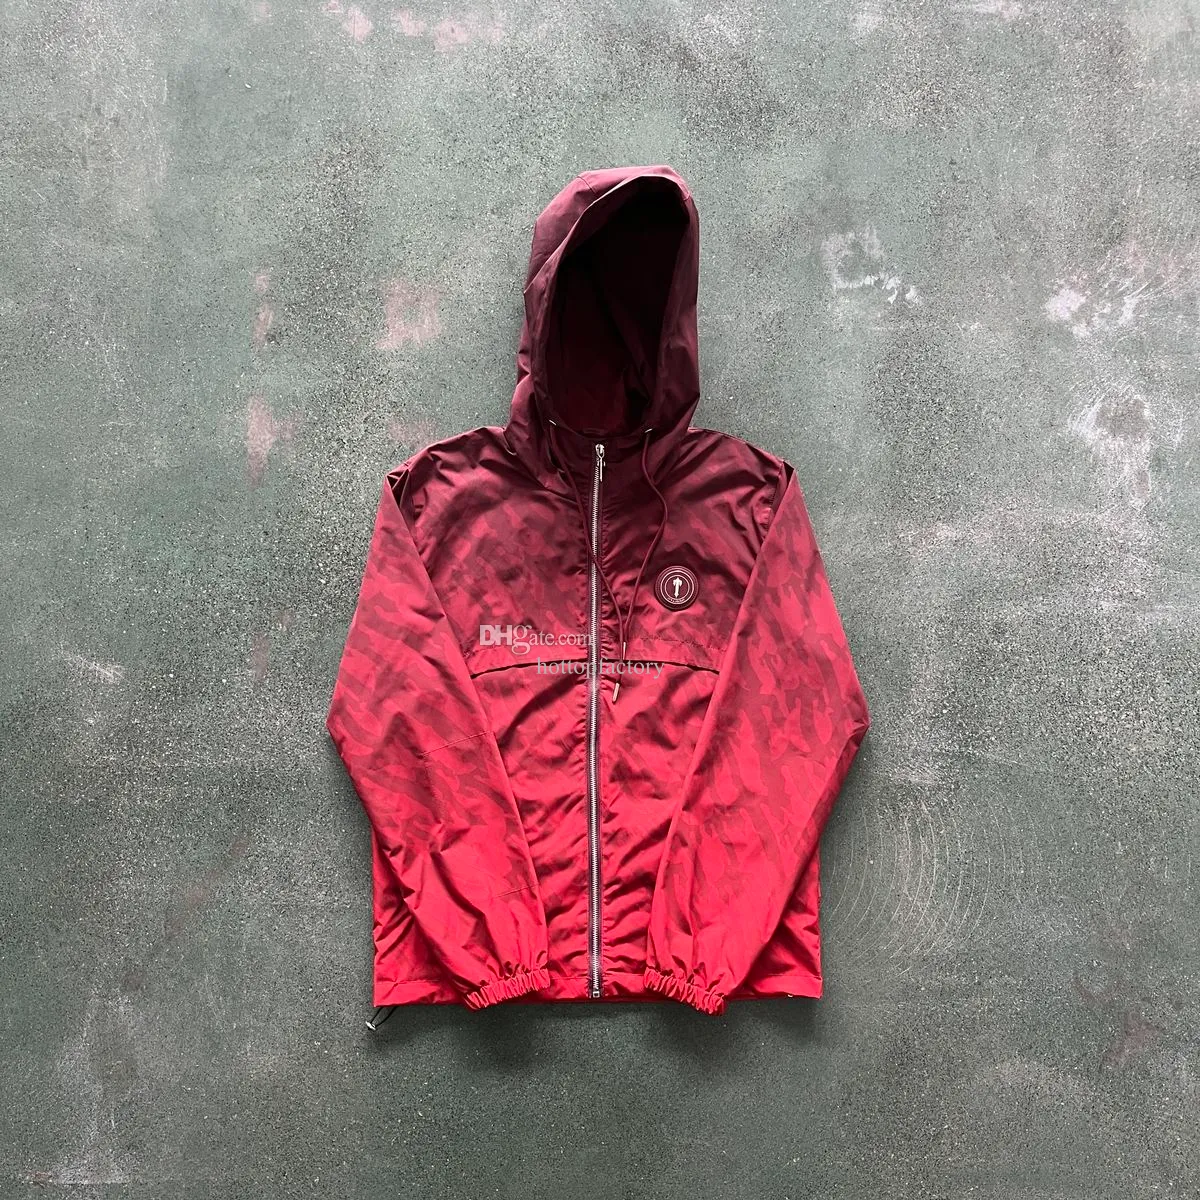 Hot Selling Trapstar Jacket Mens Hoodie Coats Irongate T Windbreaker Red to Quality Womens Coat EU Size XSXL